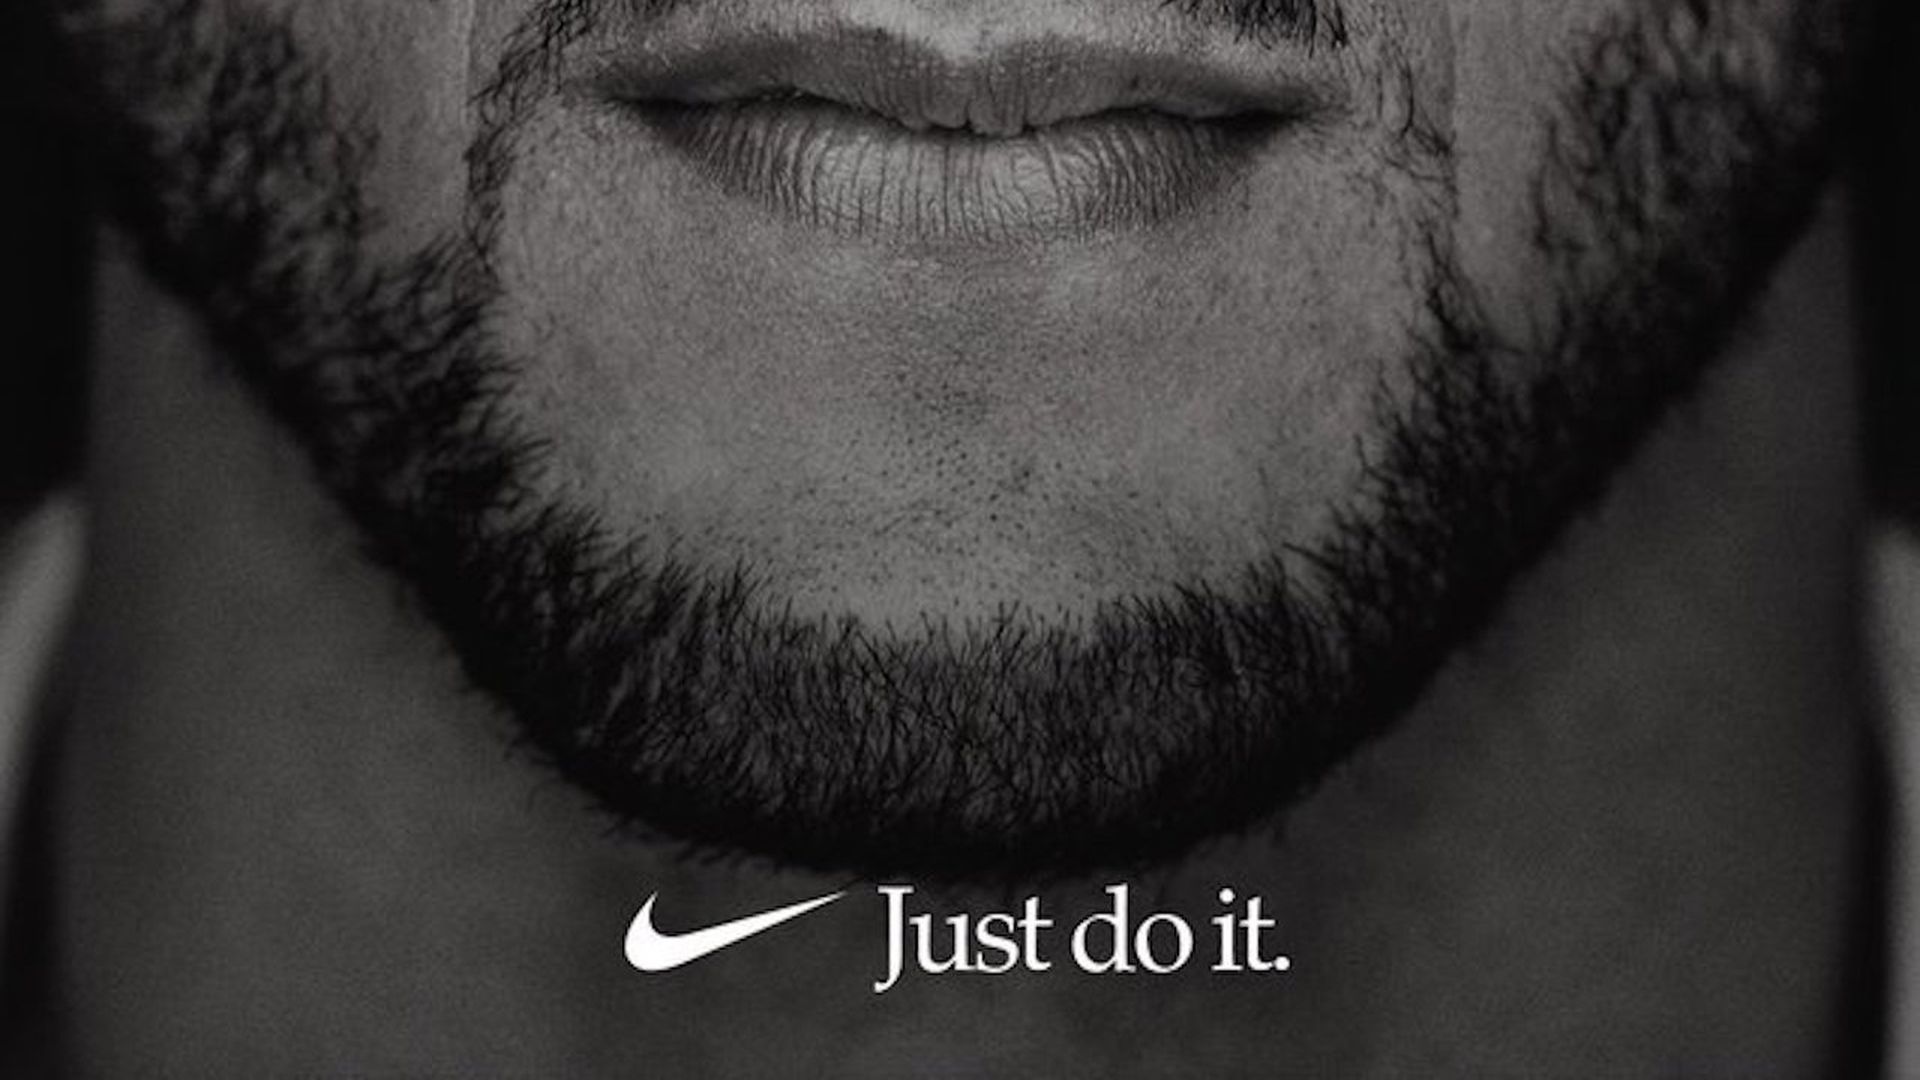 Poll shows Nike favorability has plummeted with new Colin Kaepernick campaign